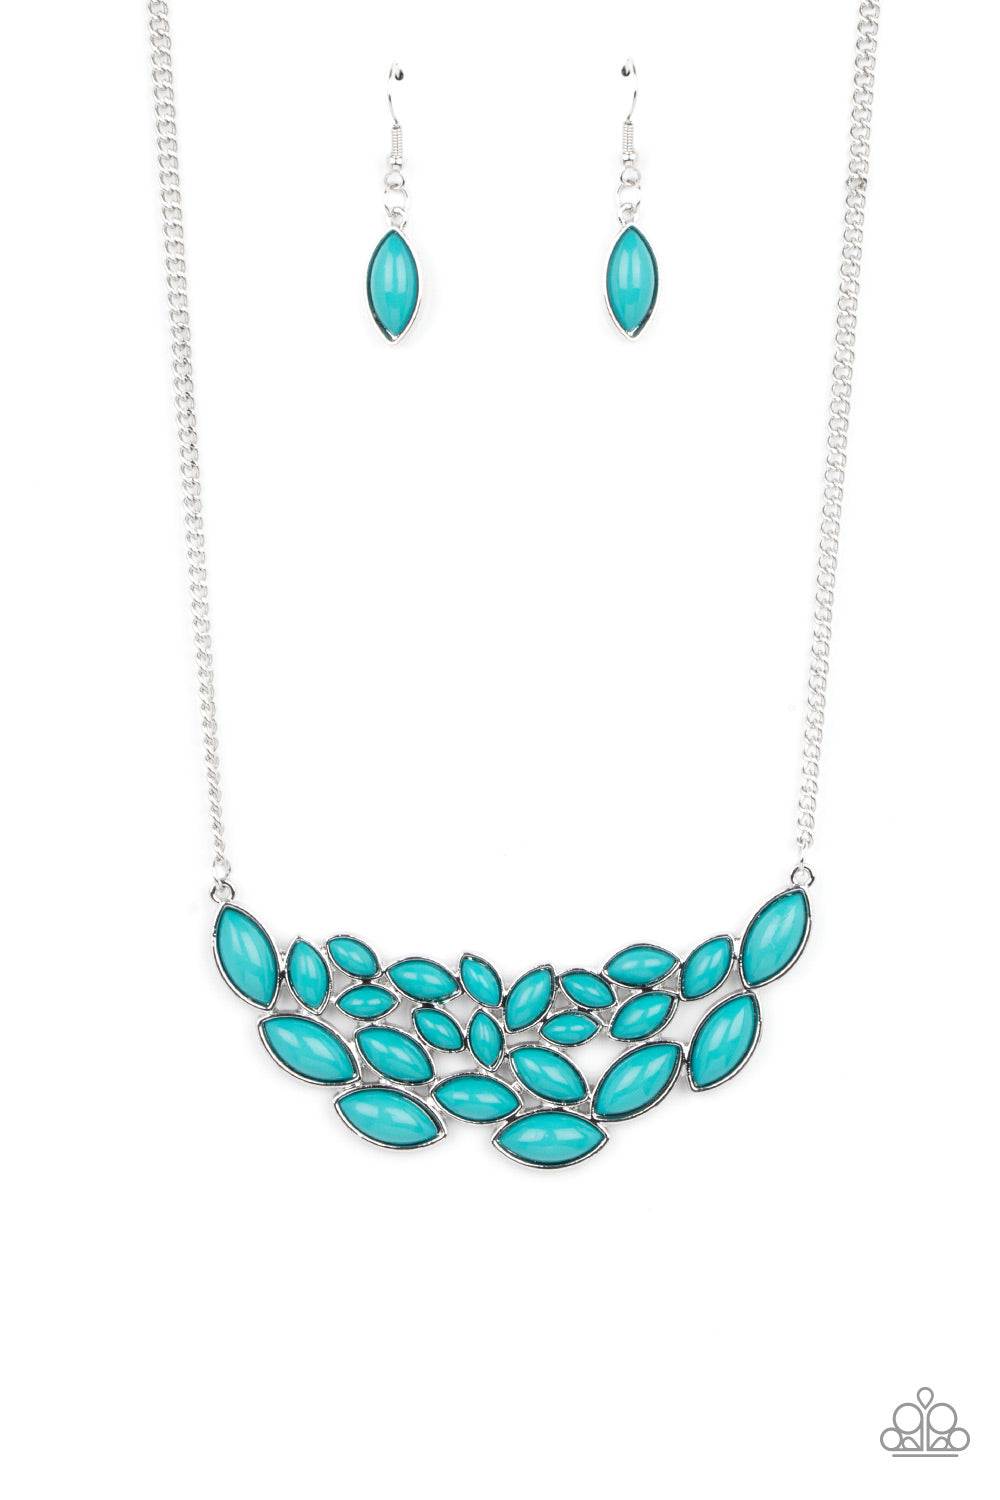 Paparazzi Eden Escape - Blue Necklace - A Finishing Touch Jewelry